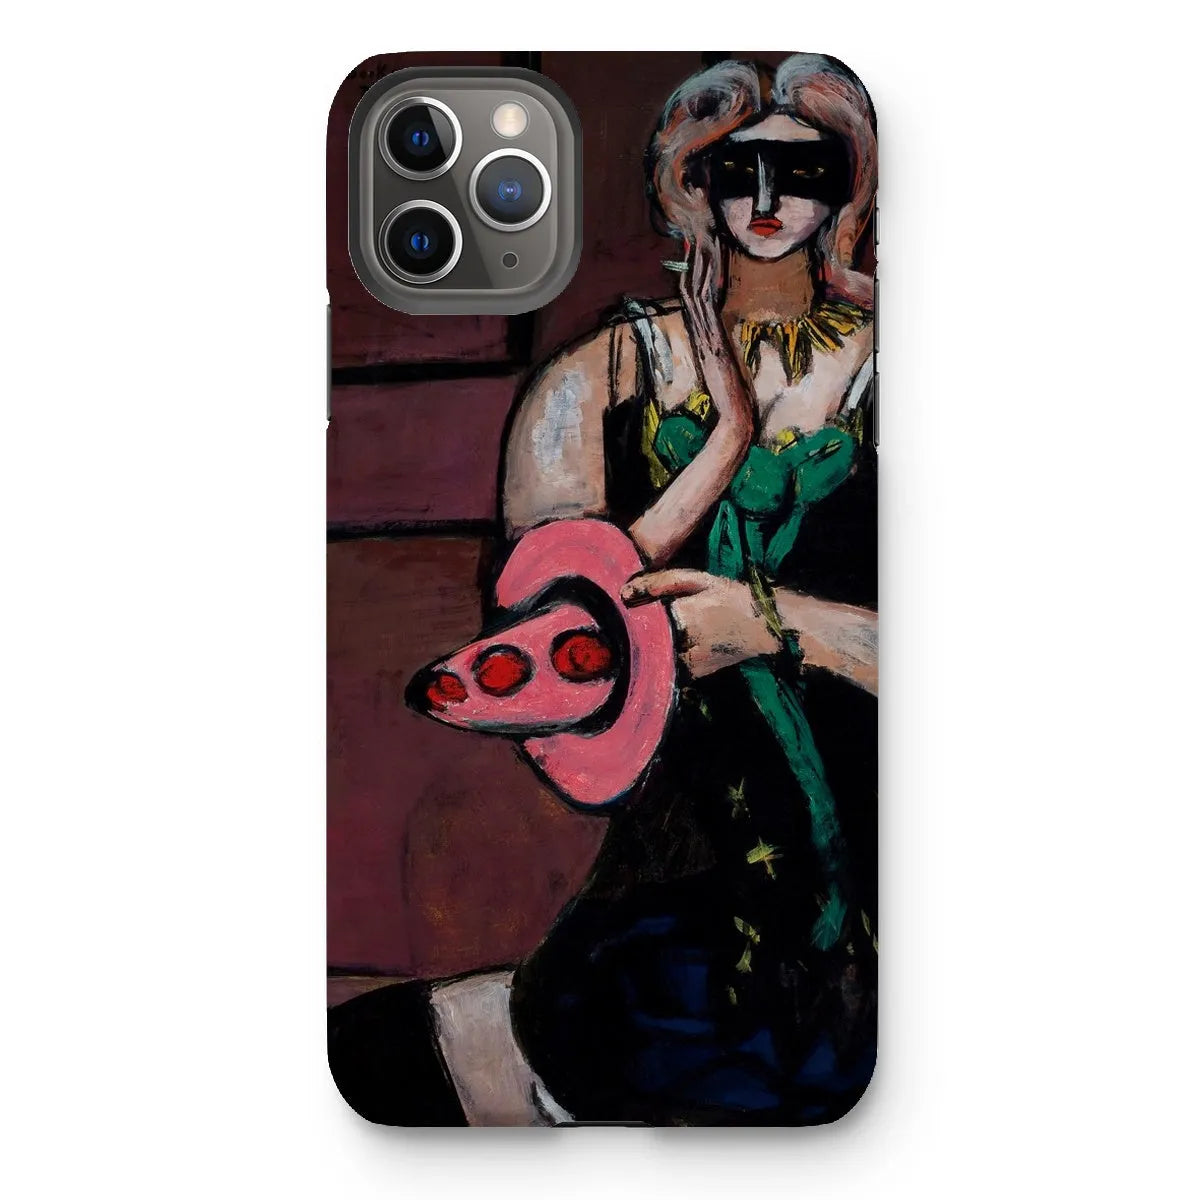 Carnival Mask - German Art Phone Case - Max Beckmann - Iphone 11 Pro Max / Matte - Mobile Phone Cases - Aesthetic Art